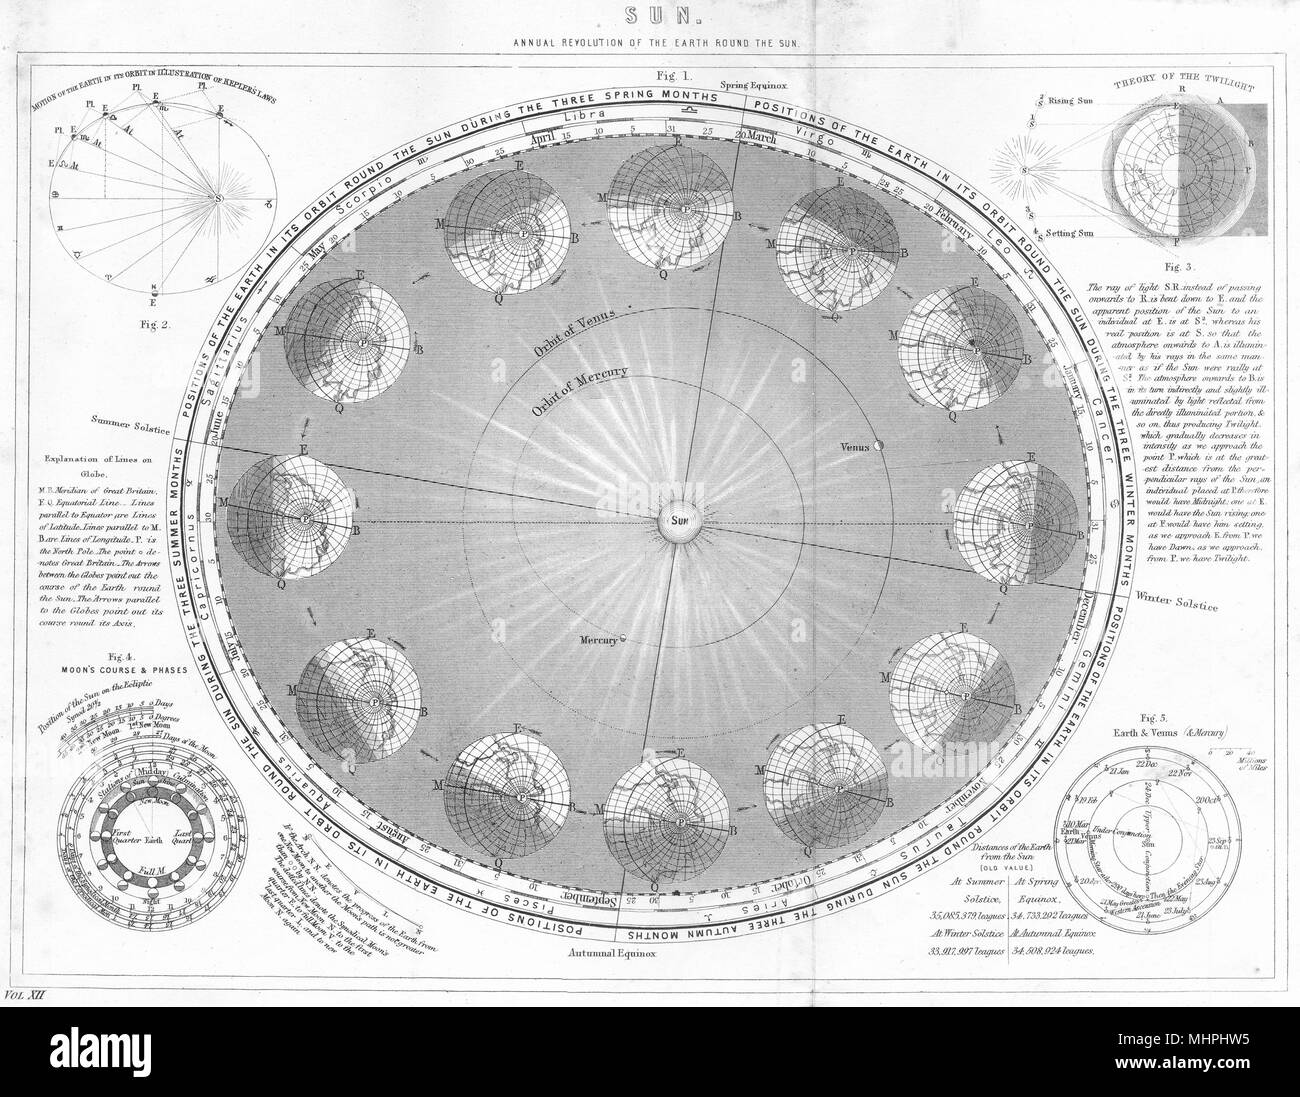 SOCIETY. Sun Annual revolution of the Earth round the sun 1880 old print Stock Photo